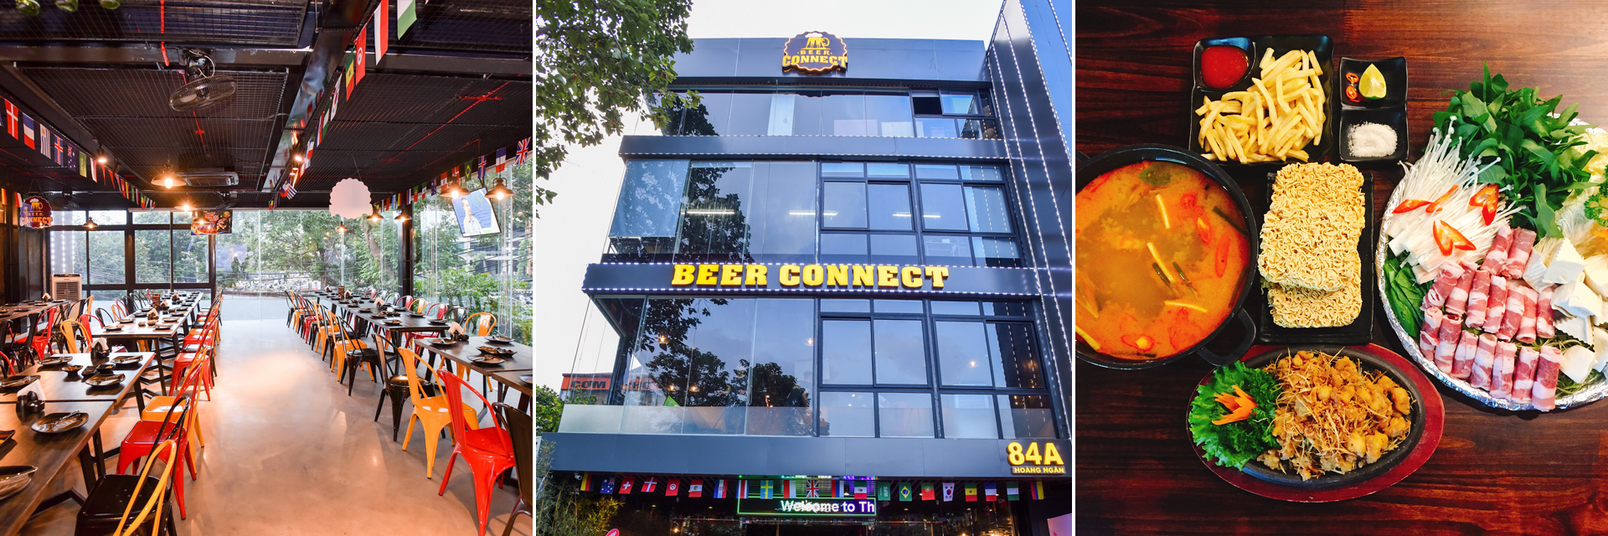 Beer Connect